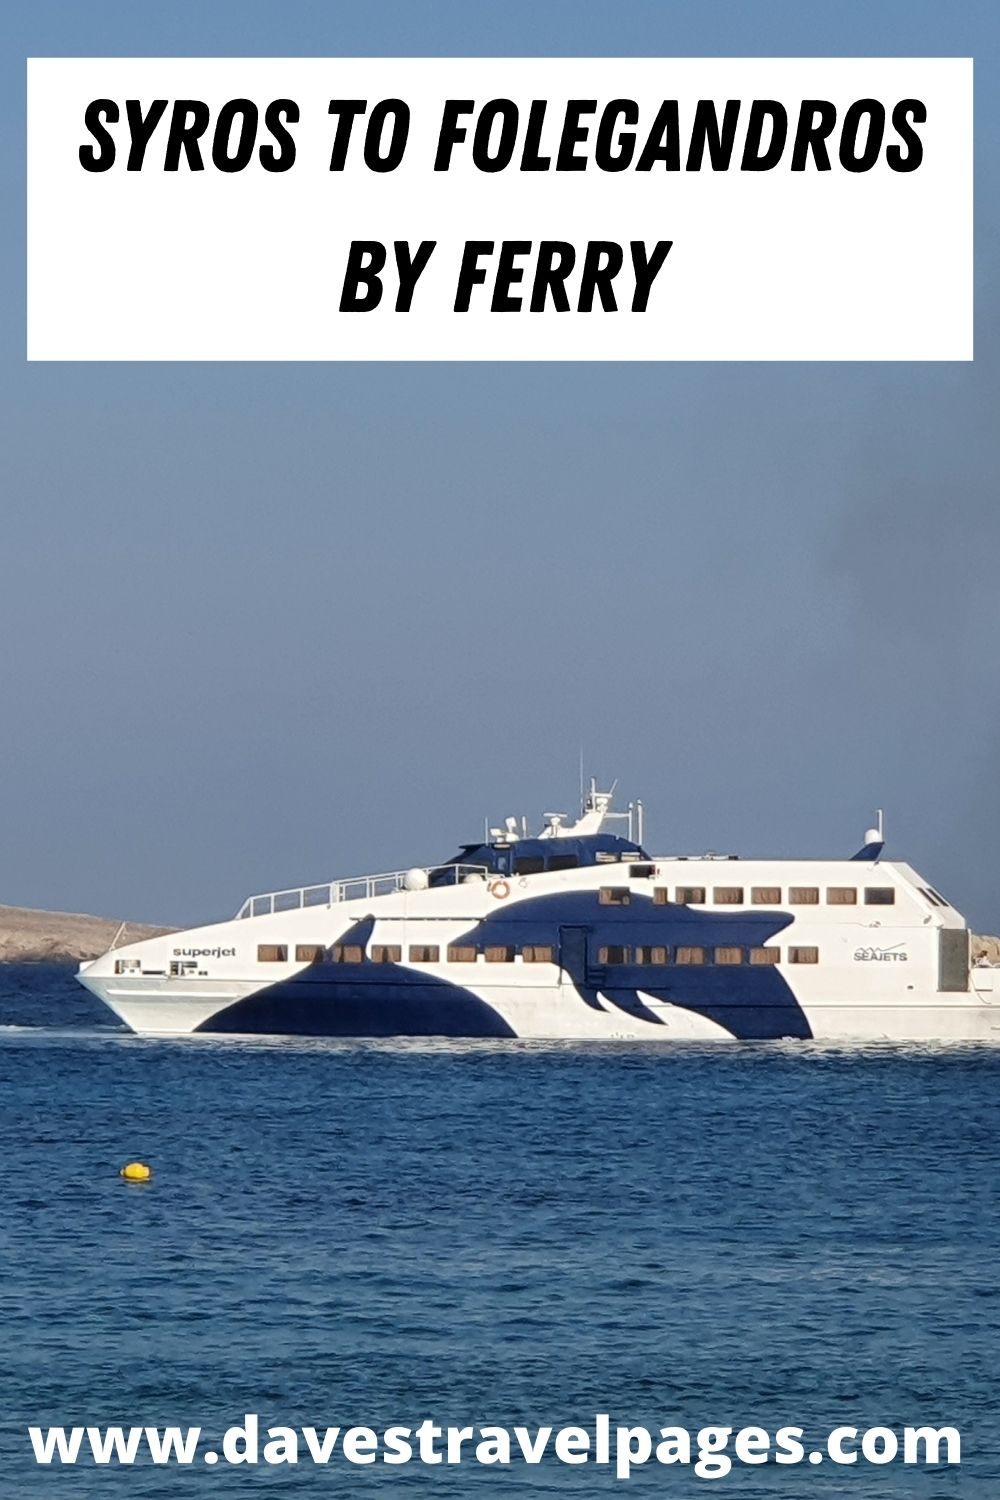 How to get from Syros to Folegandros by ferry in Greece